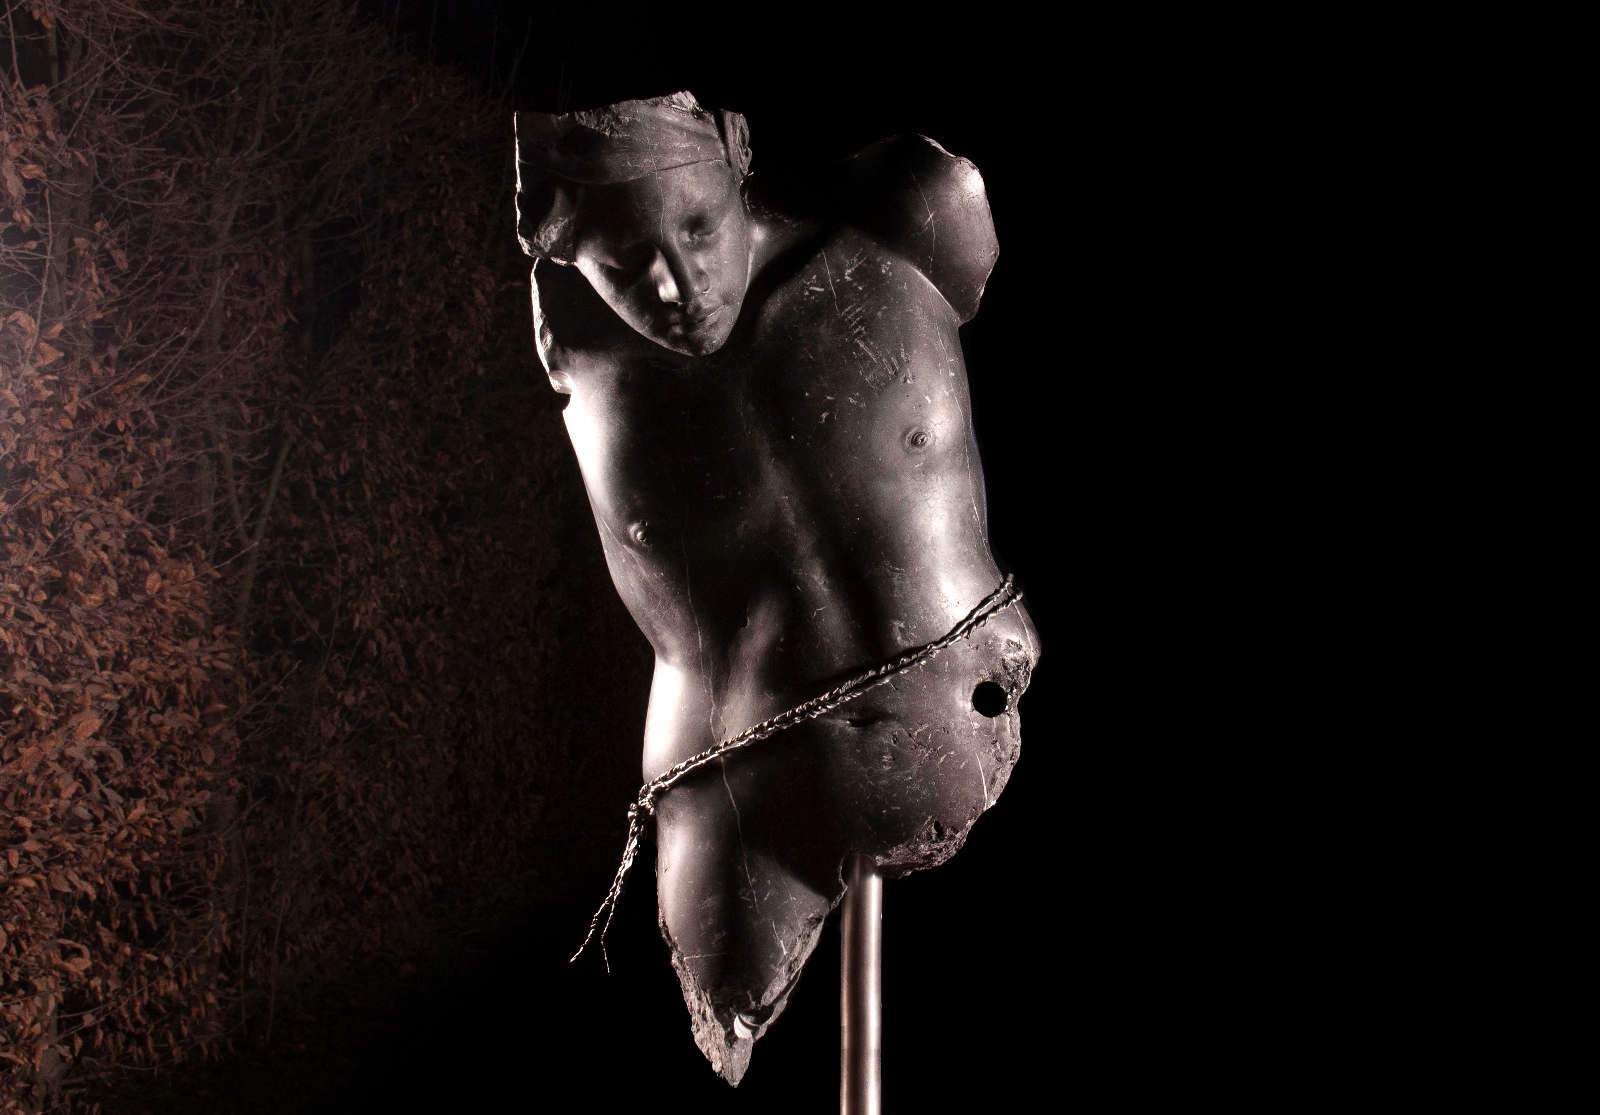 Michelangelo Galliani's first Bologna solo show: his St. Sebastian on display.